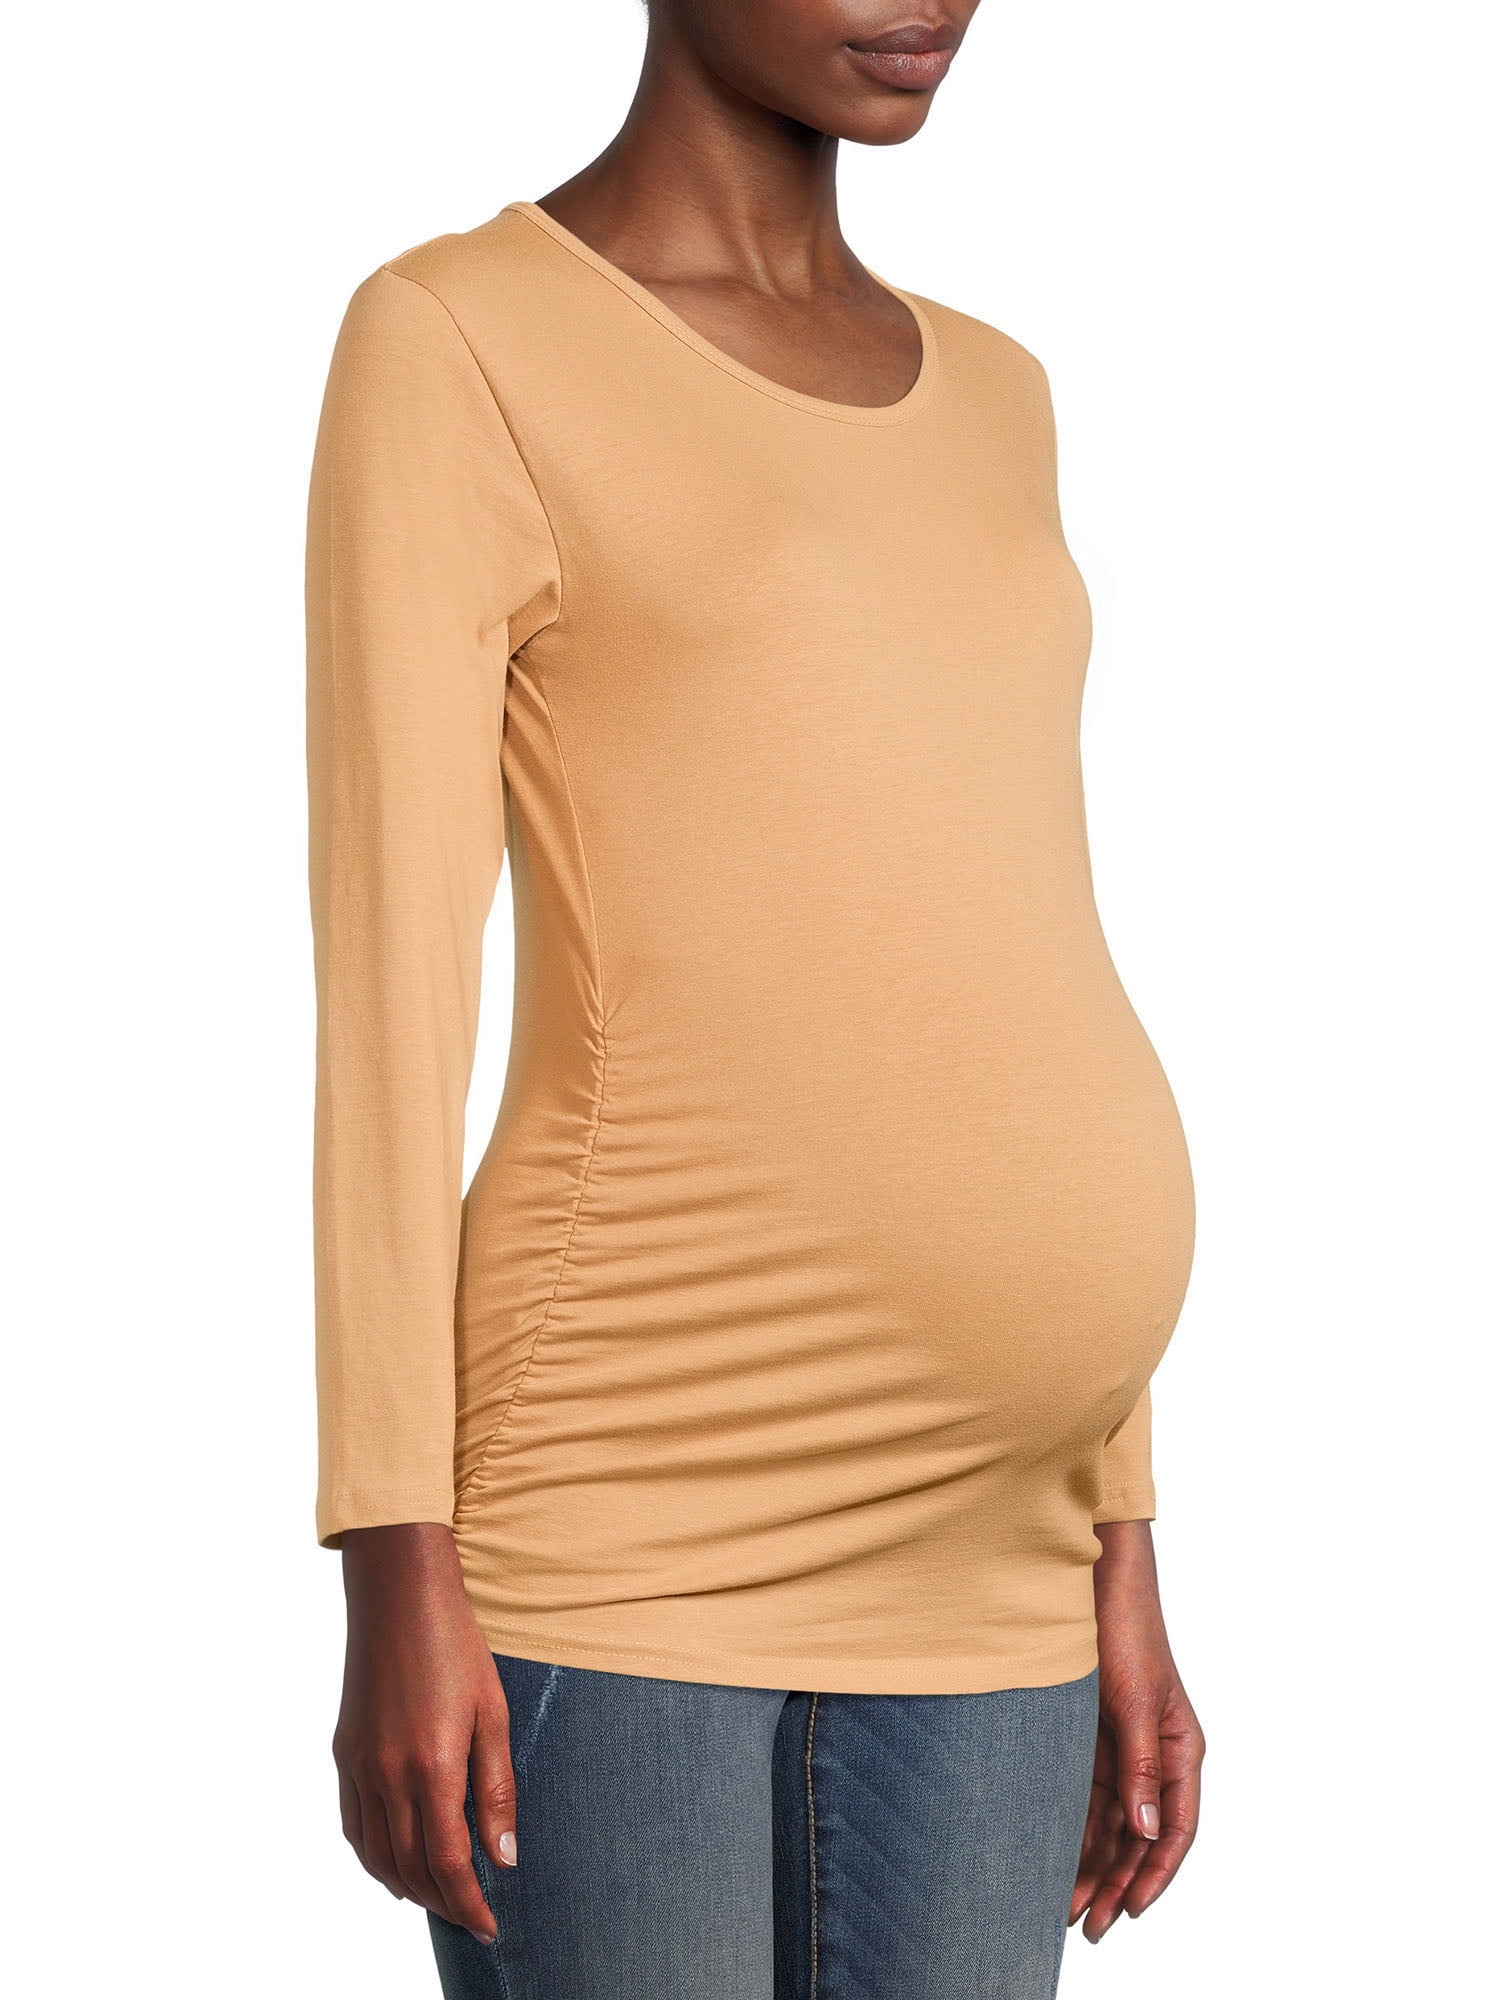 GLAMIX Women's Maternity T-Shirt Side Ruched Scoop Neck Long Sleeve Basic Pregnancy Tops 